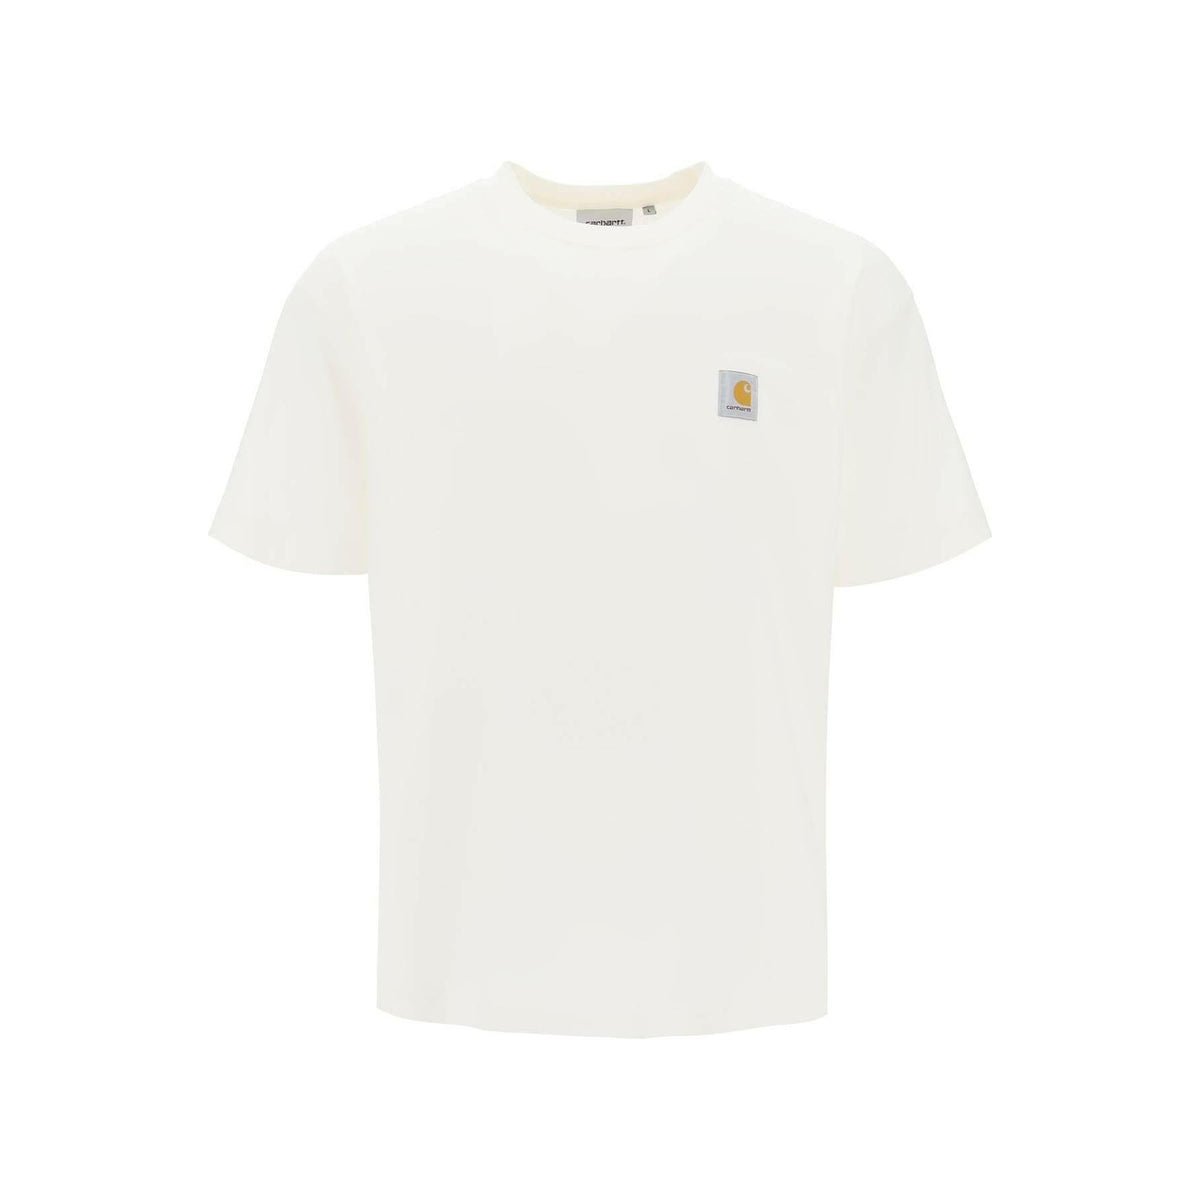 CARHARTT WIP - Wax White Cotton Jersey T-Shirt With Lived-In Look - JOHN JULIA